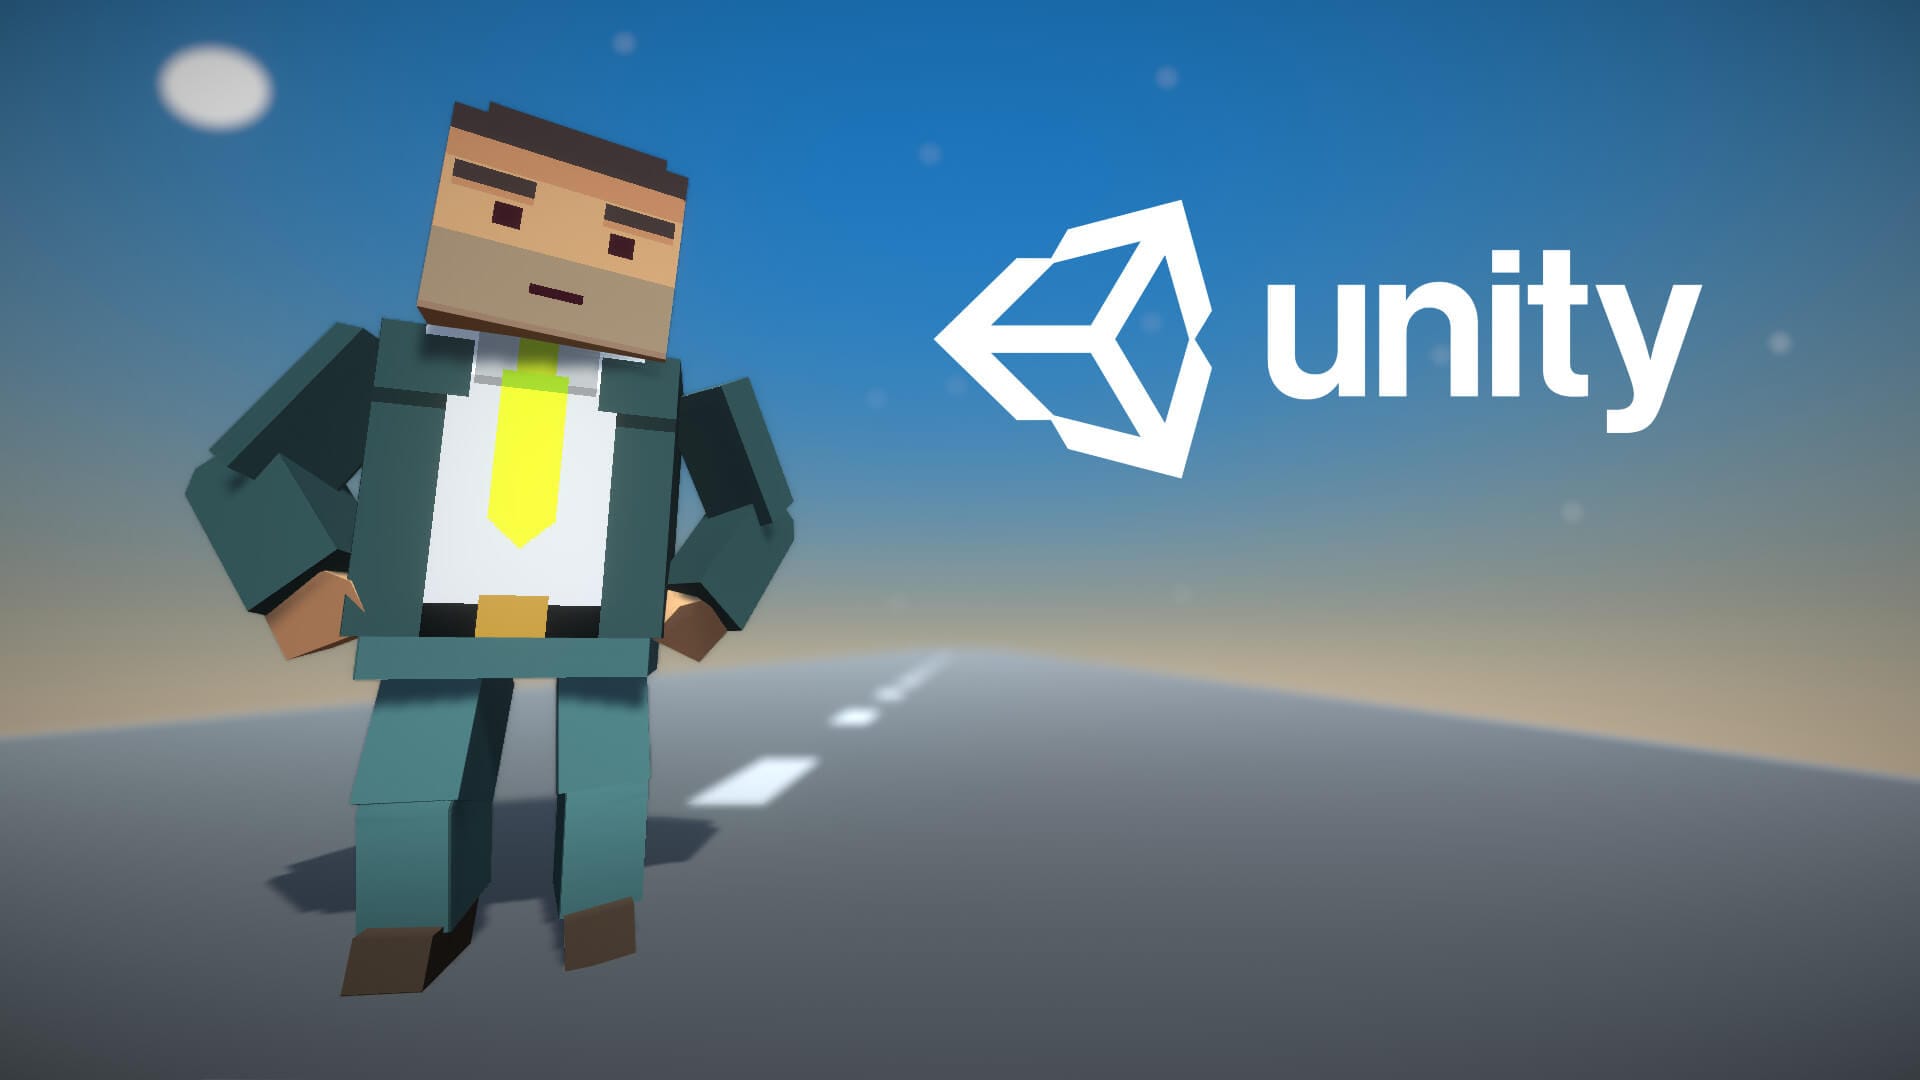 A character created in Unity, which is the most popular Steam game engine